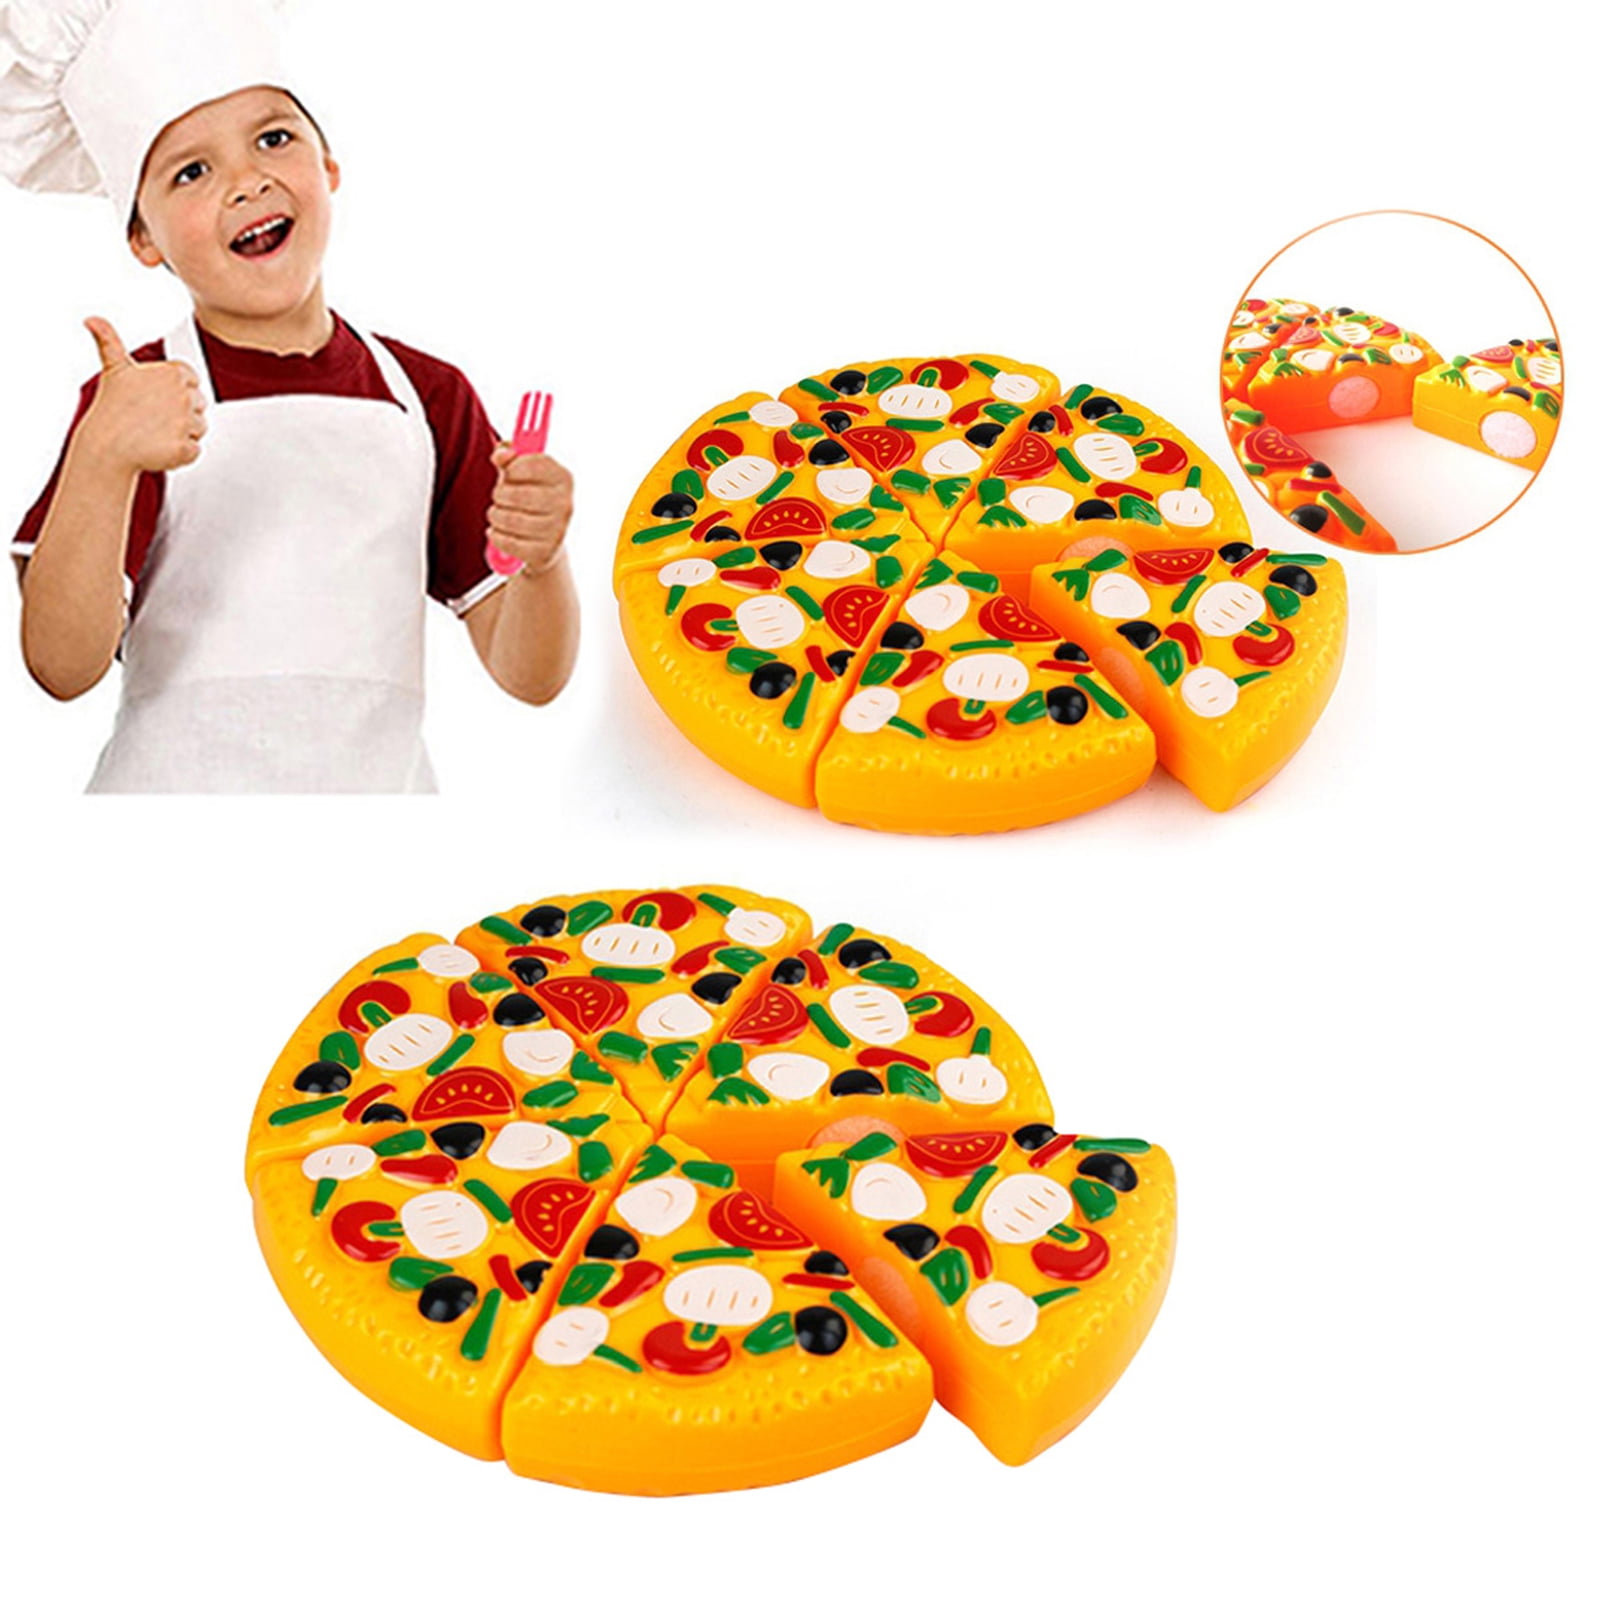 Play Food Set,simulated Pizza Cutting Toys,safe Role Play Wooden Toys For Kids  Children Learning & Educational Gift(1set, Color)